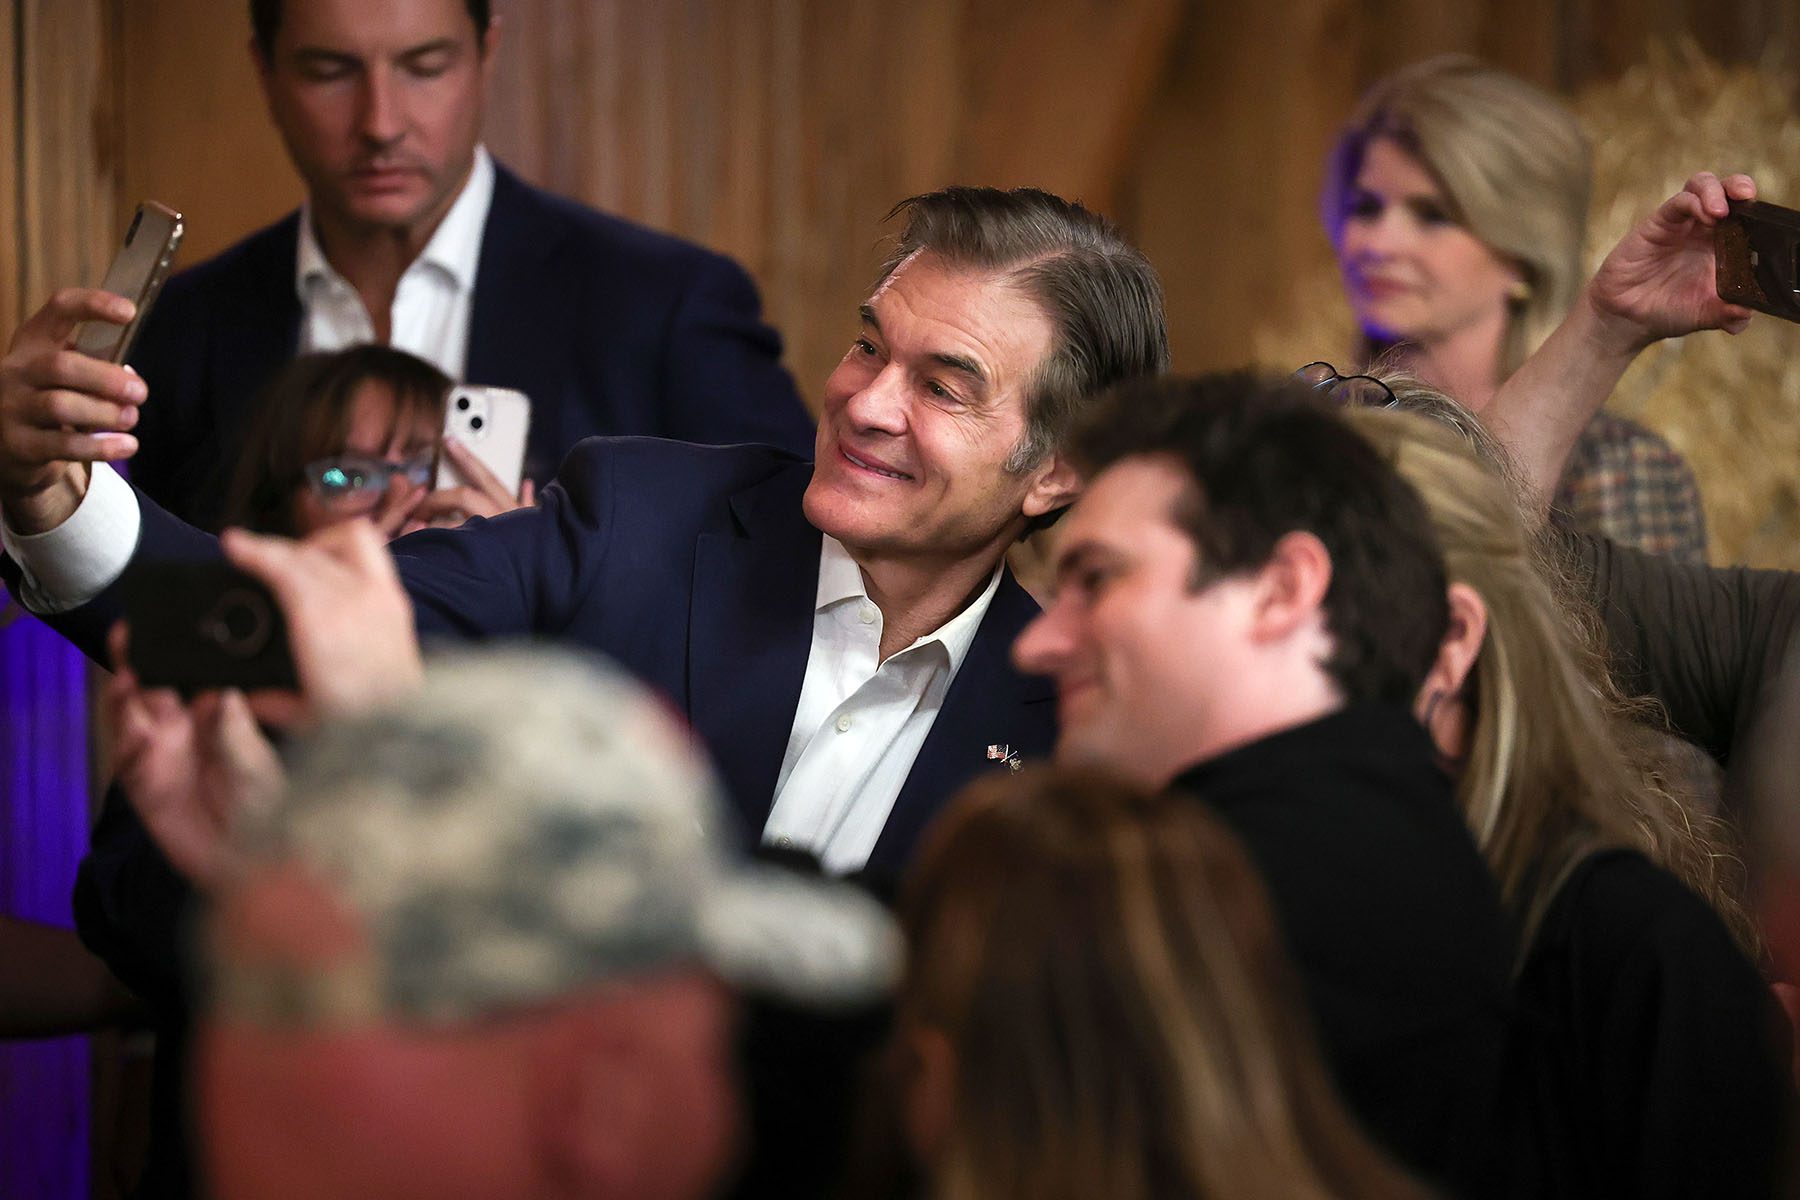 Dr. Mehmet Oz greets audience members after speaking at a campaign event.